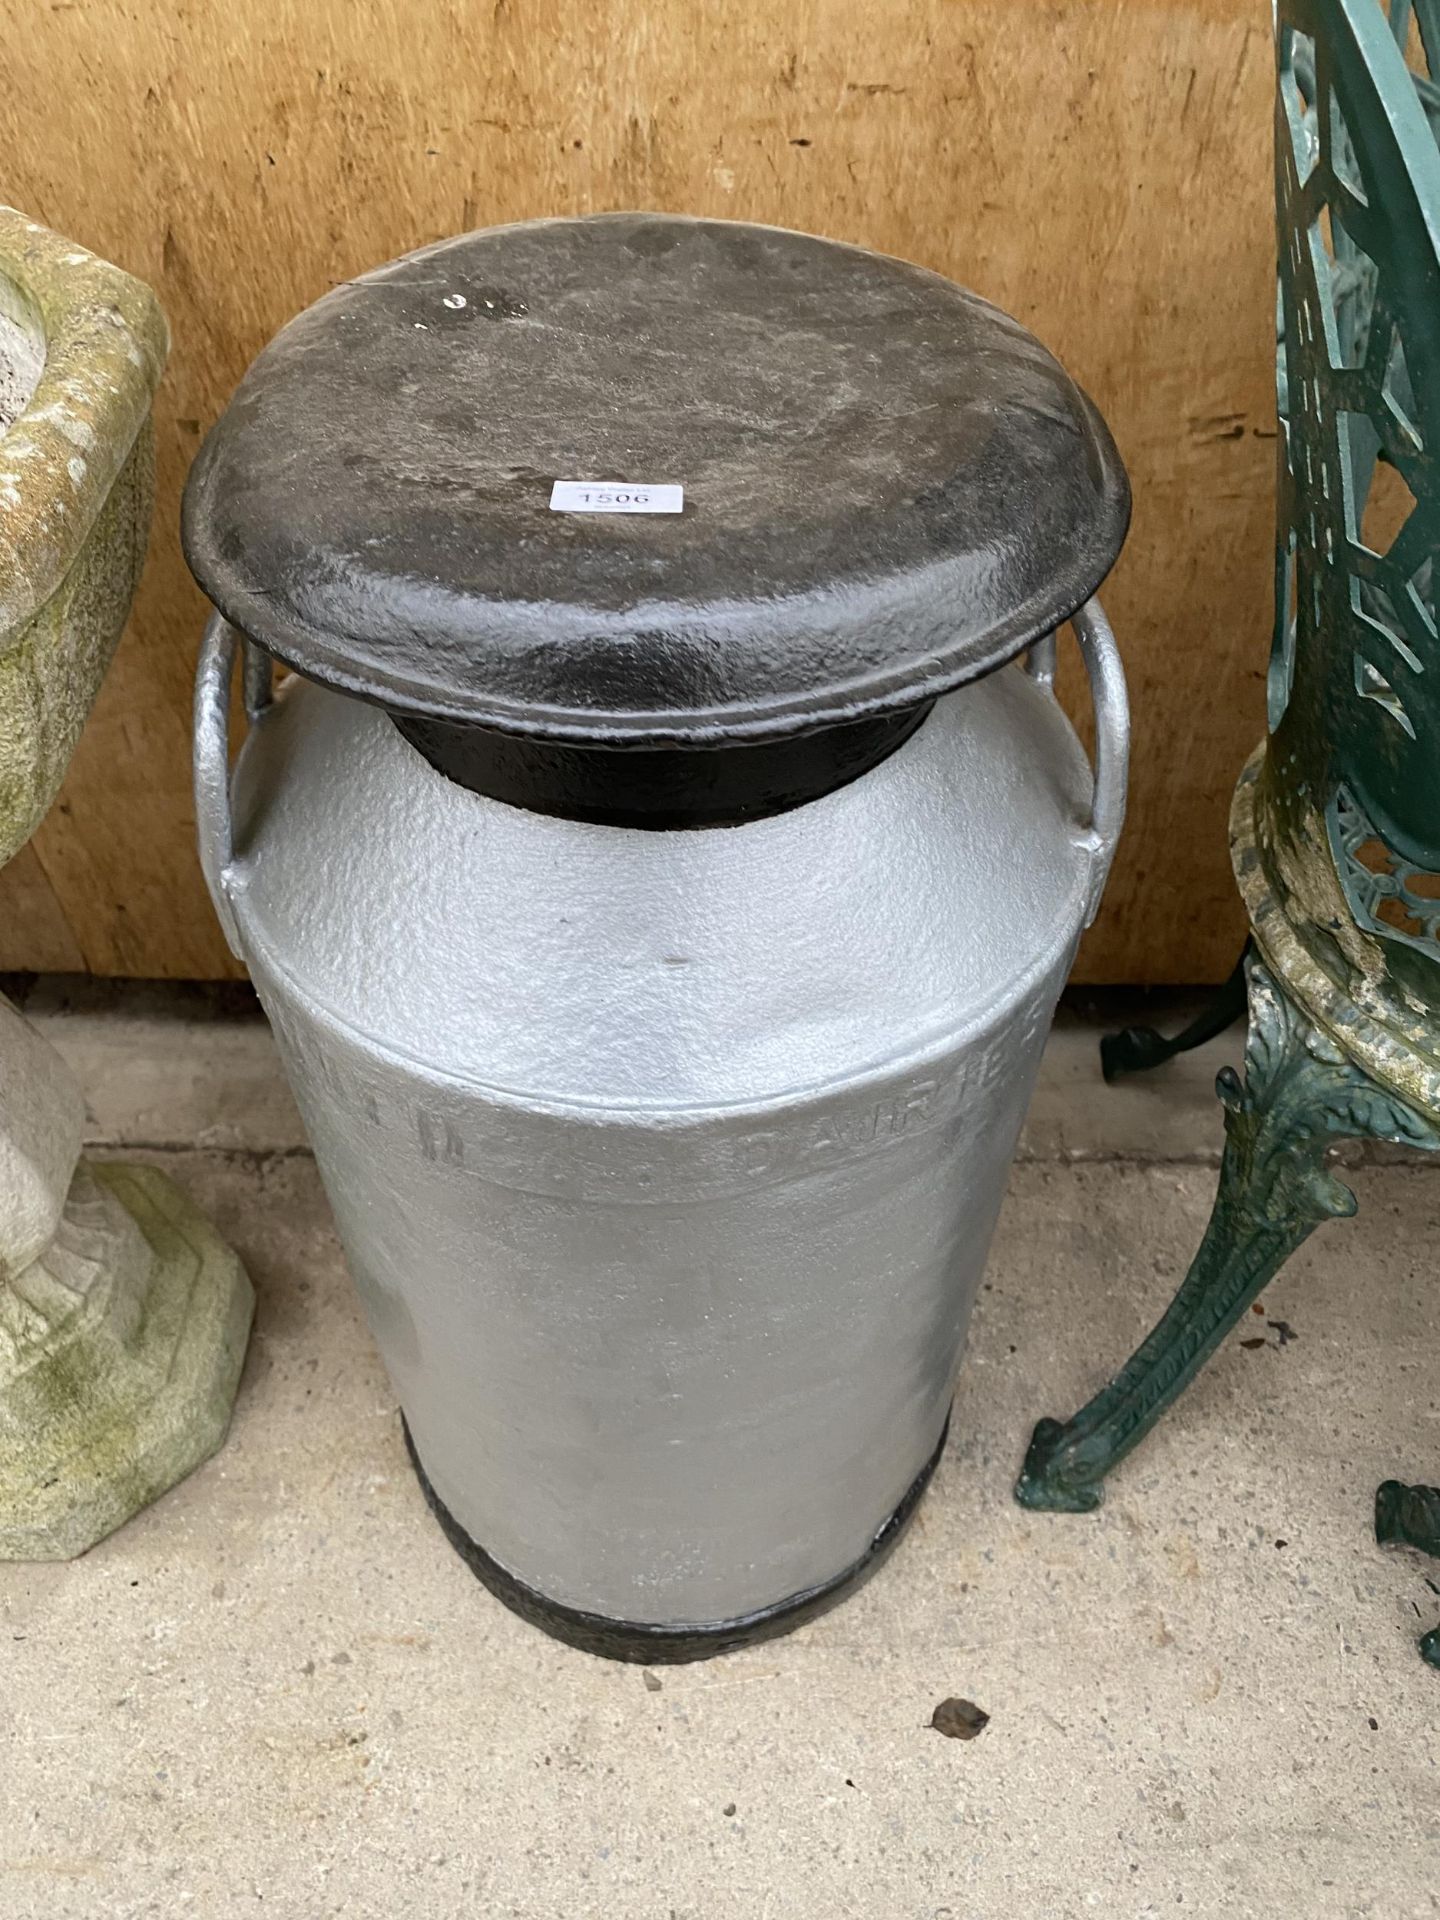 AN ALUMINIUM MILK CHURN WITH LID AND BEARING THE NAME 'UNITED DAIRIES'